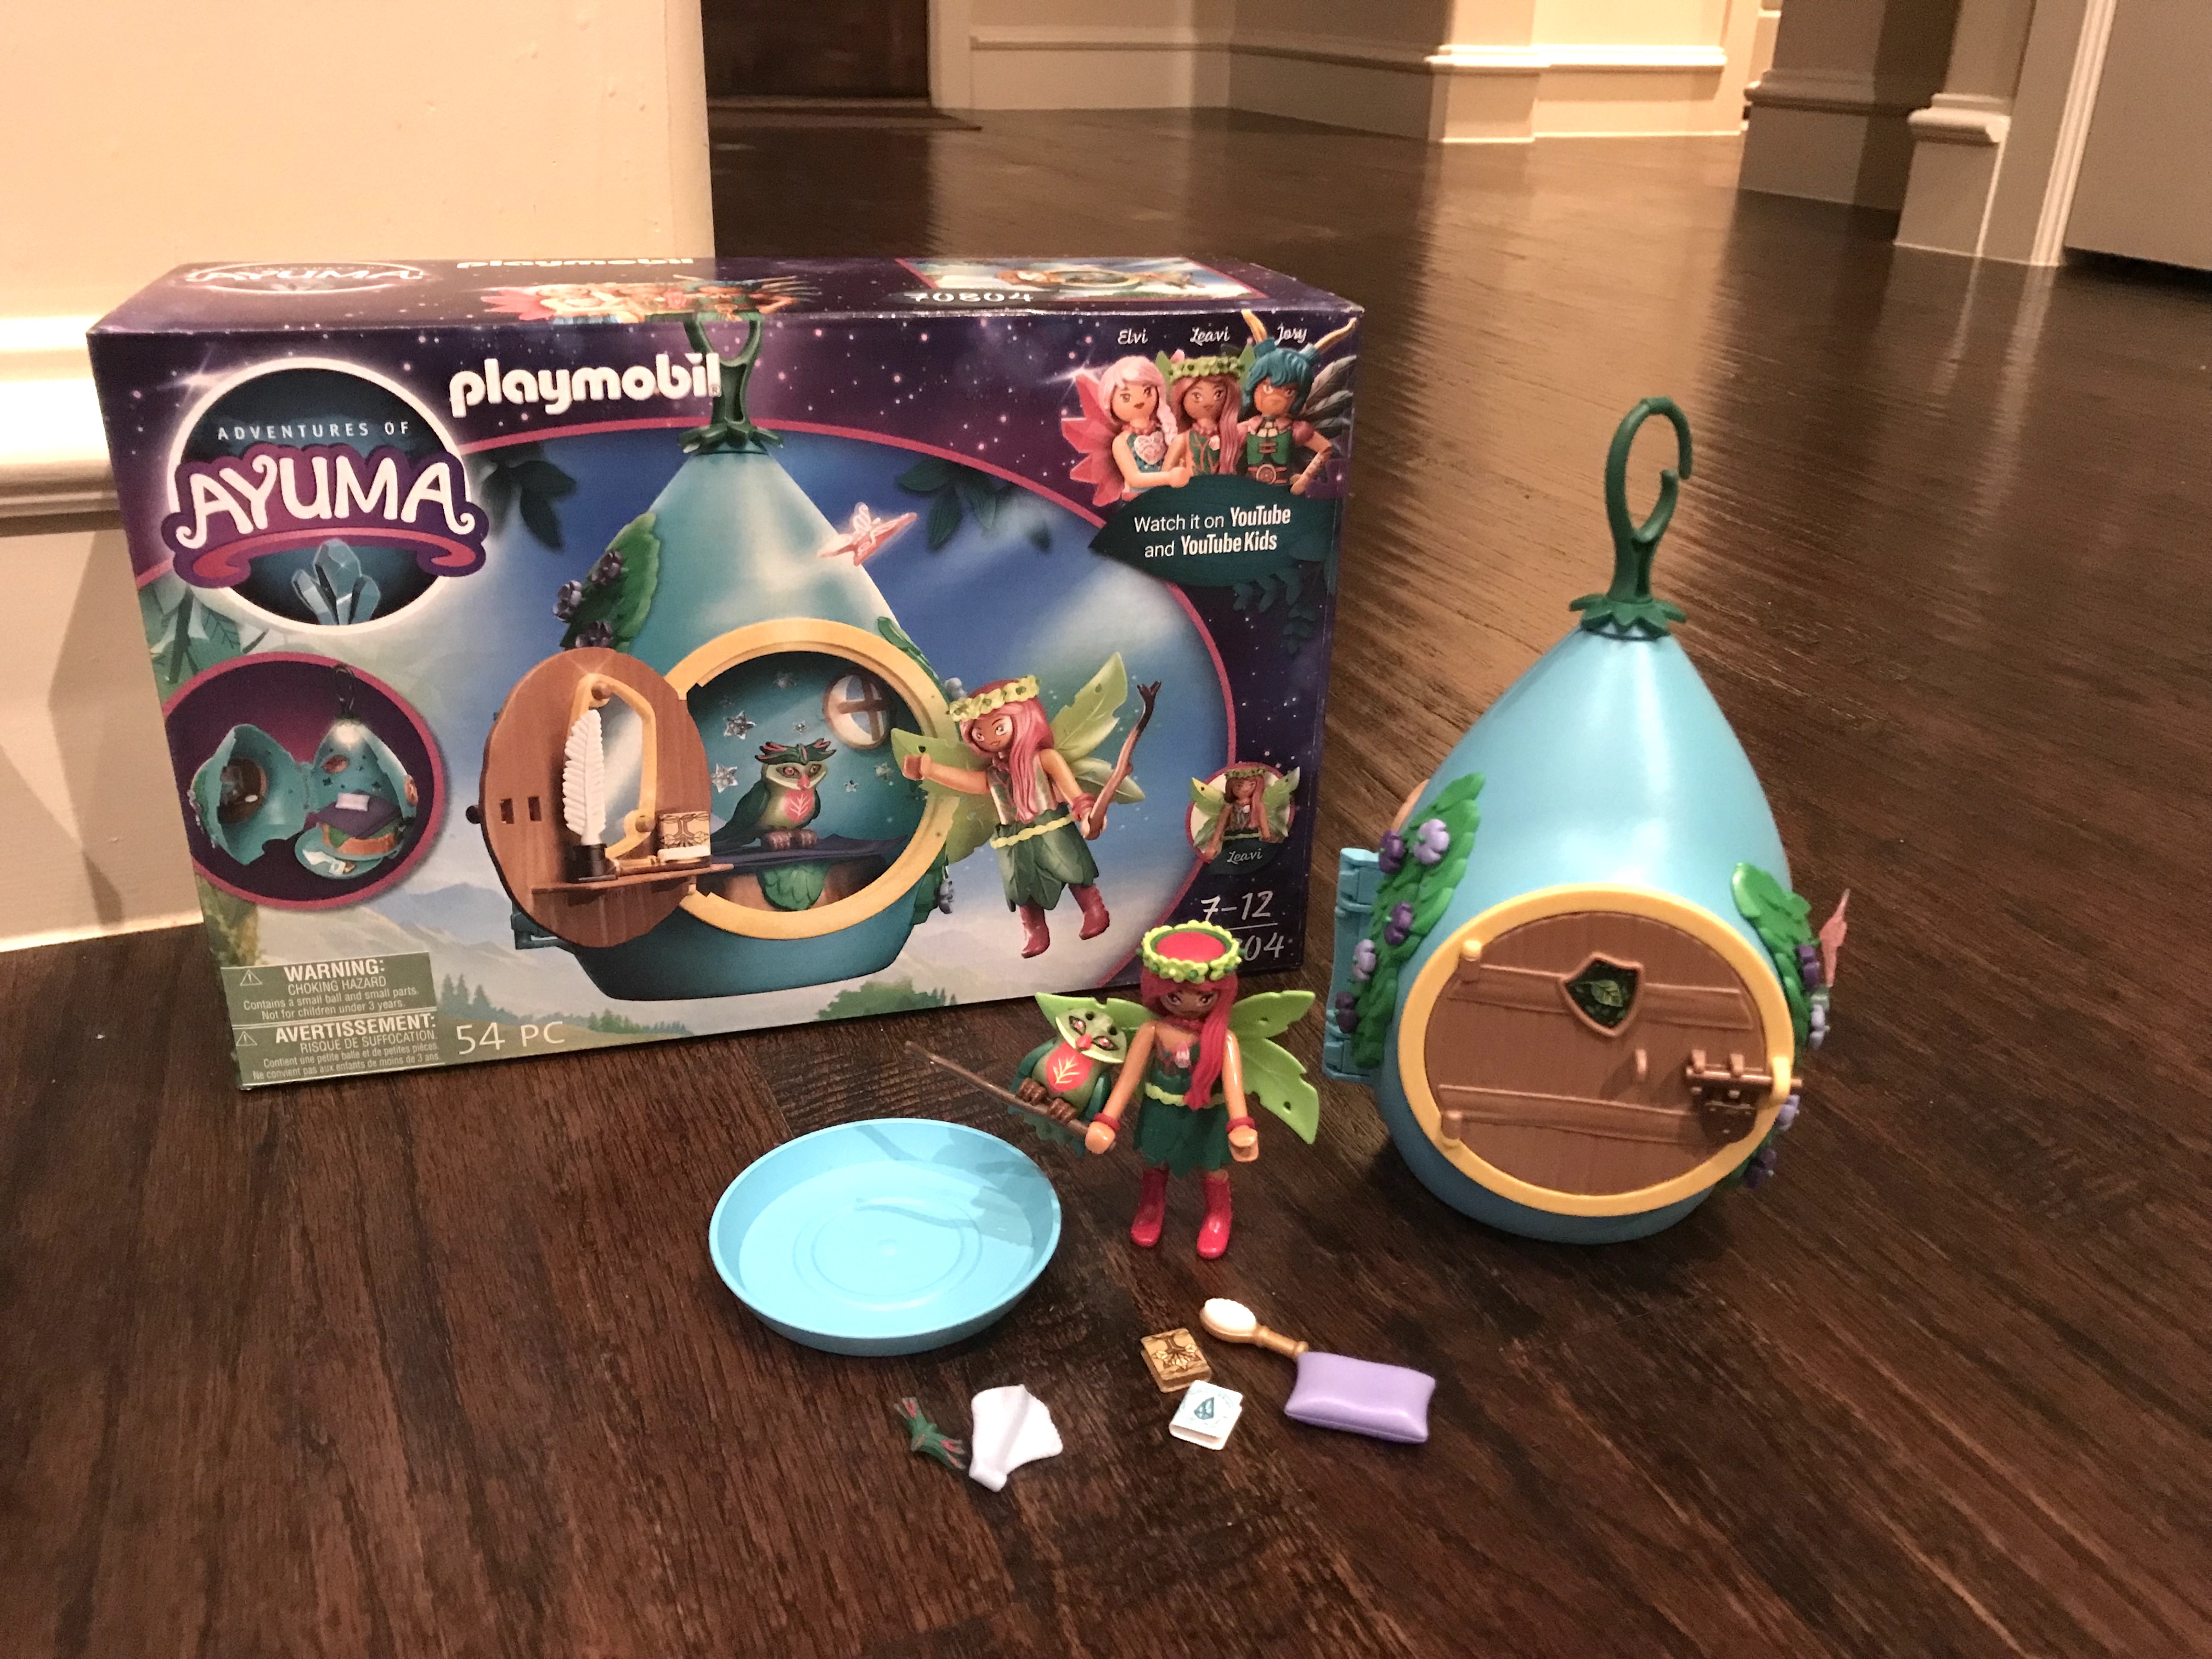 Dallas Mom Blog and Fort Worth Mom Blogger: Trendy Mom Reviews: DIY Fairy  Door Craft + a Fantastical New Play Set from PLAYMOBIL (The Best Fairy  Themed Birthday Gifts and Craft)